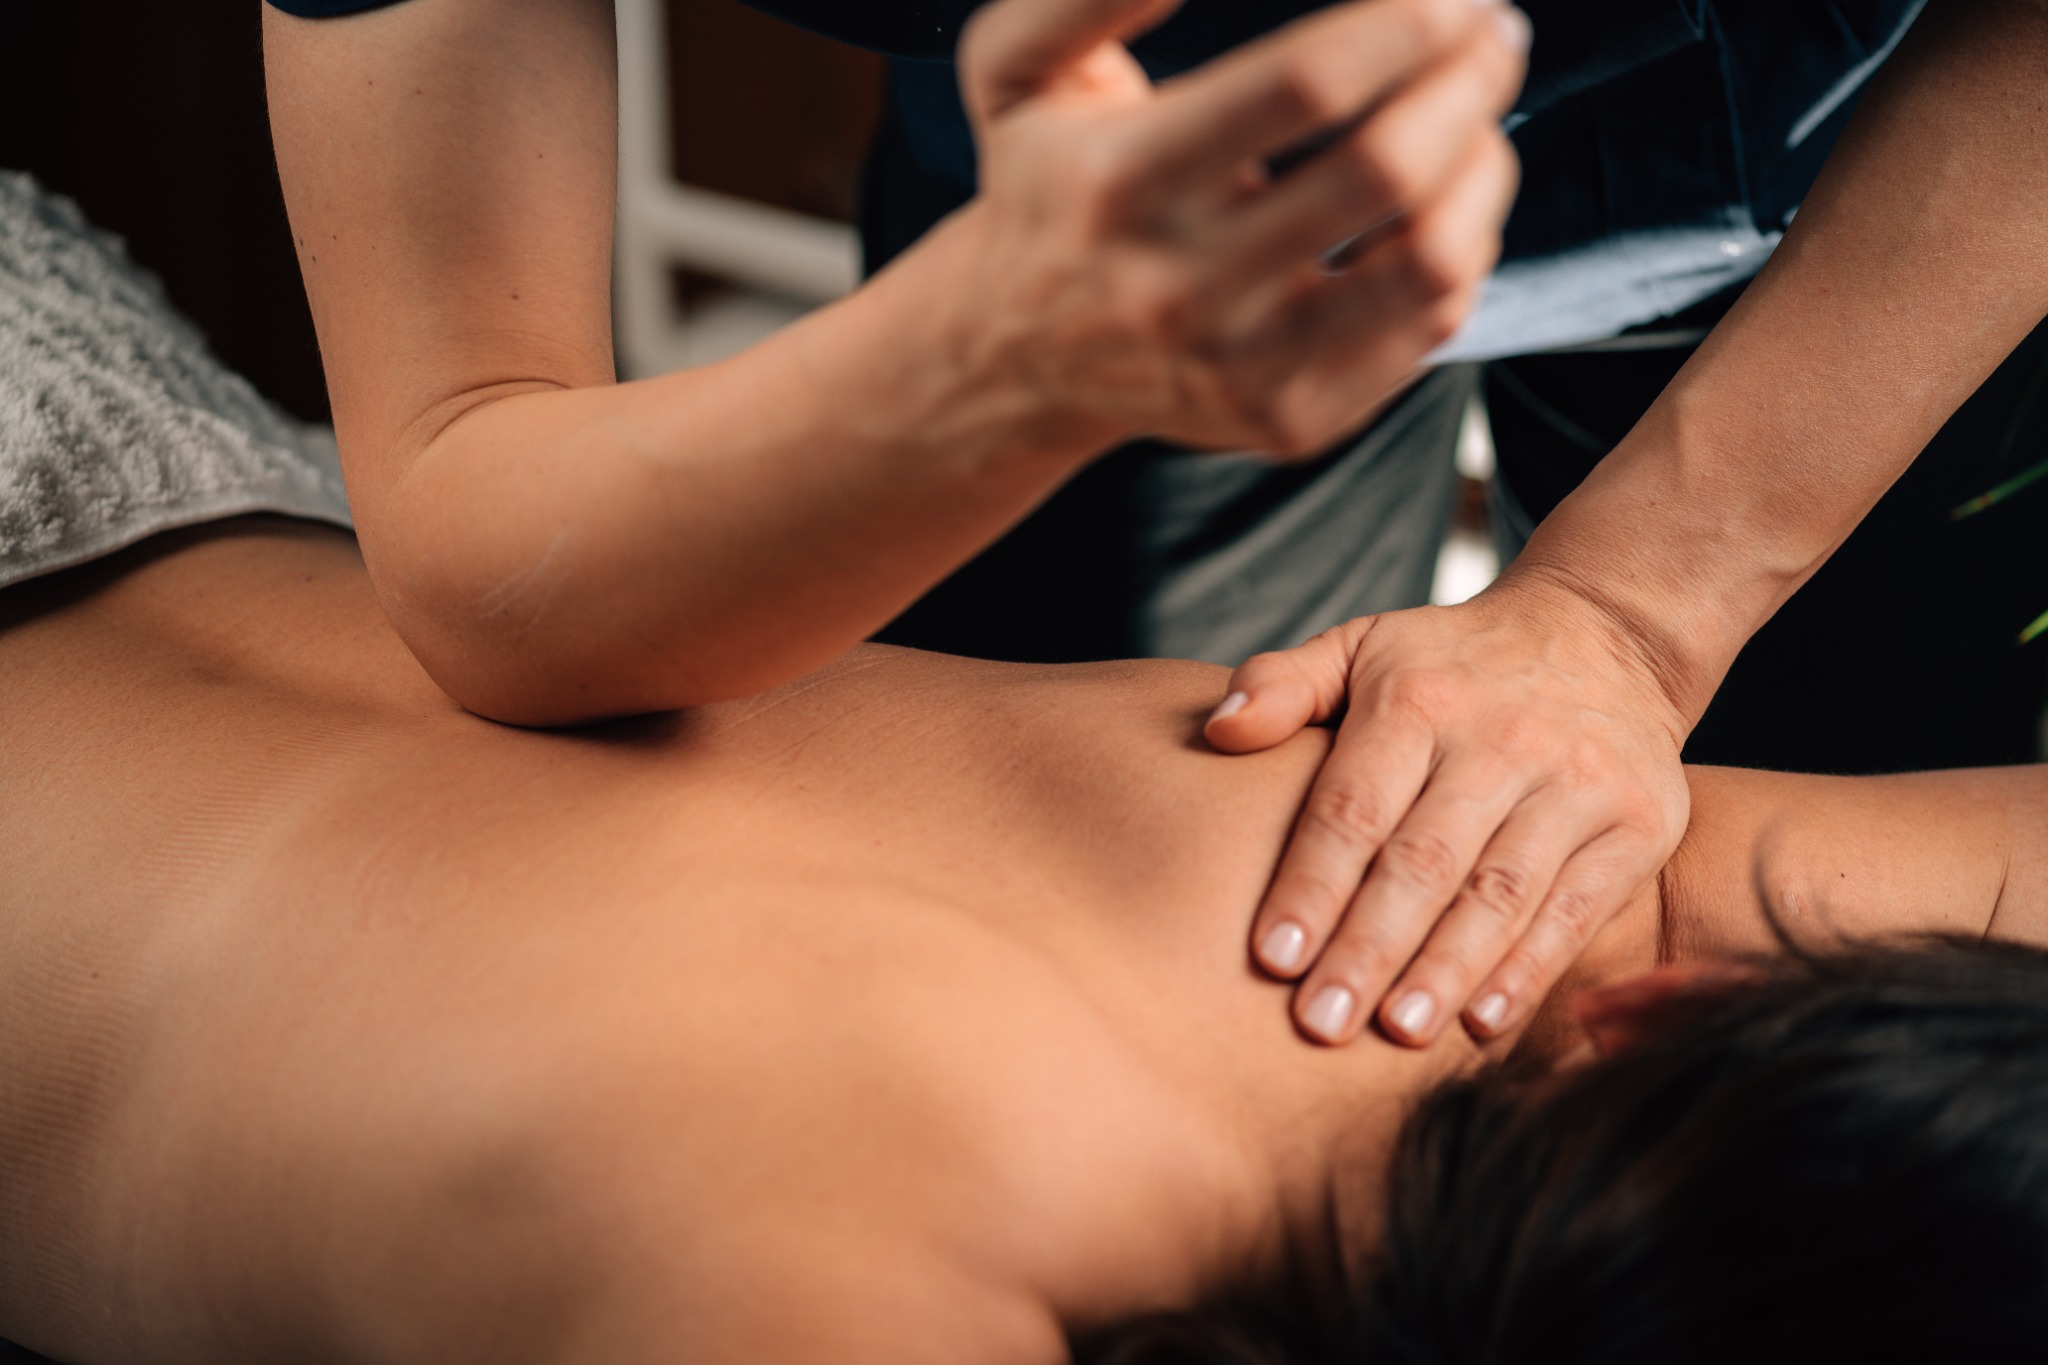 Deep Tissue Massage Is One Of The Most Common Types Of Massage Therapy Available.